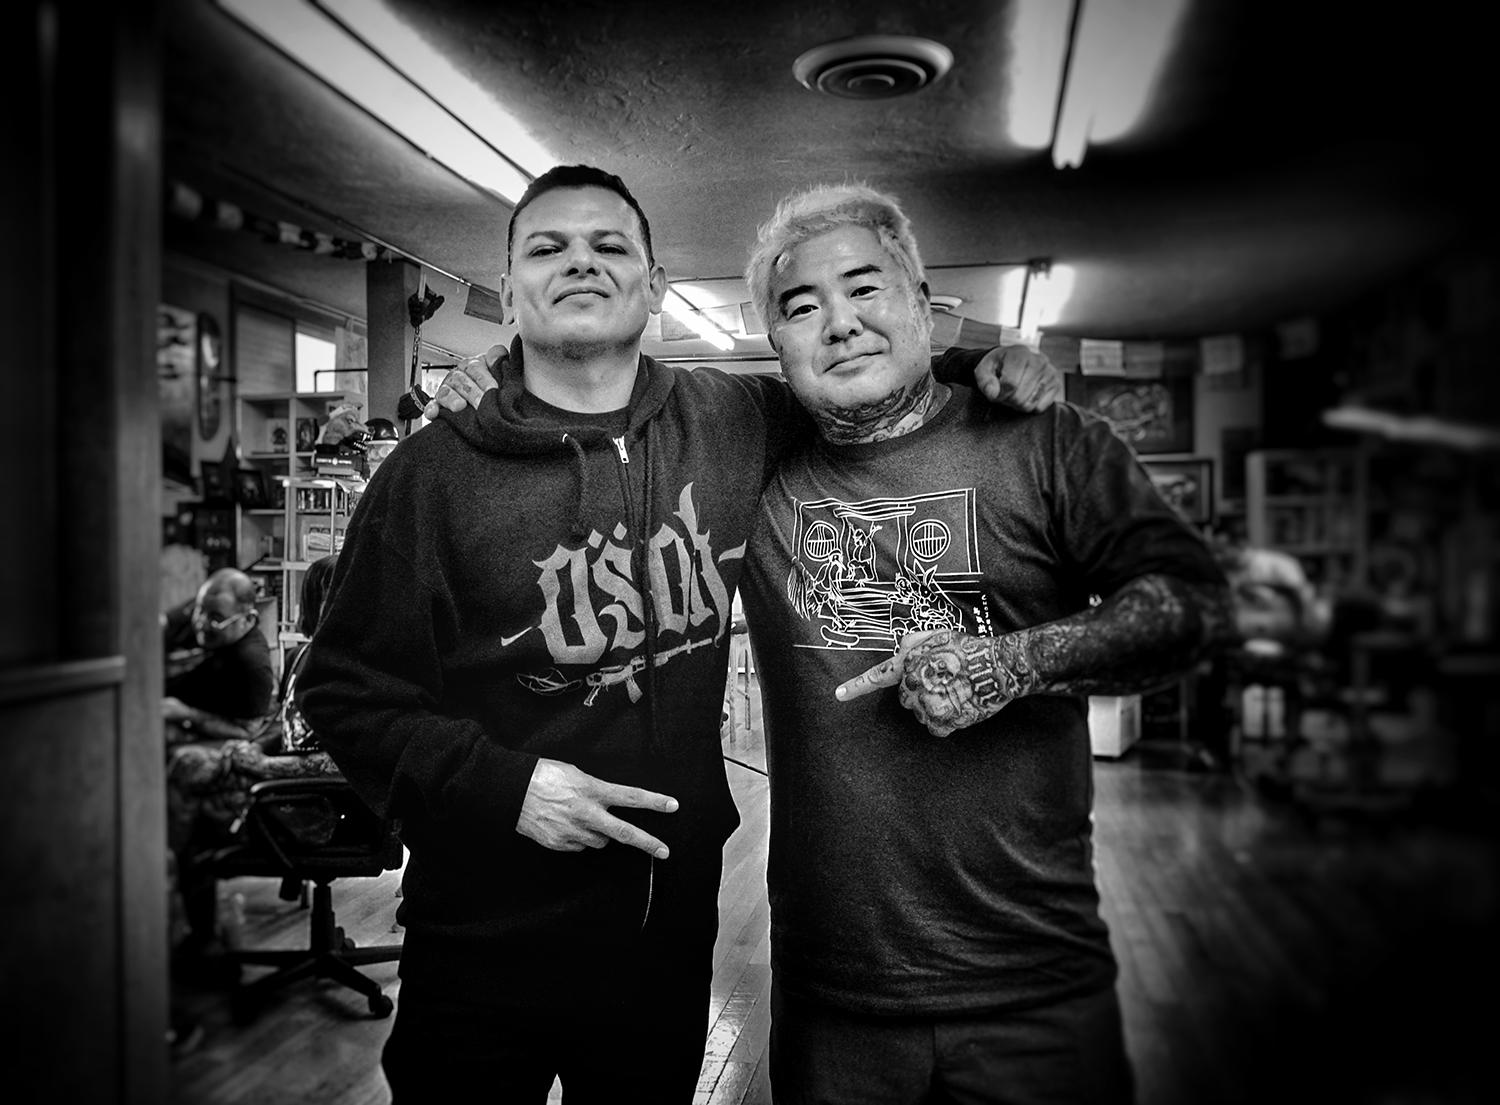 An appreciation of Chuey Quintanar and Kitamura, two legends